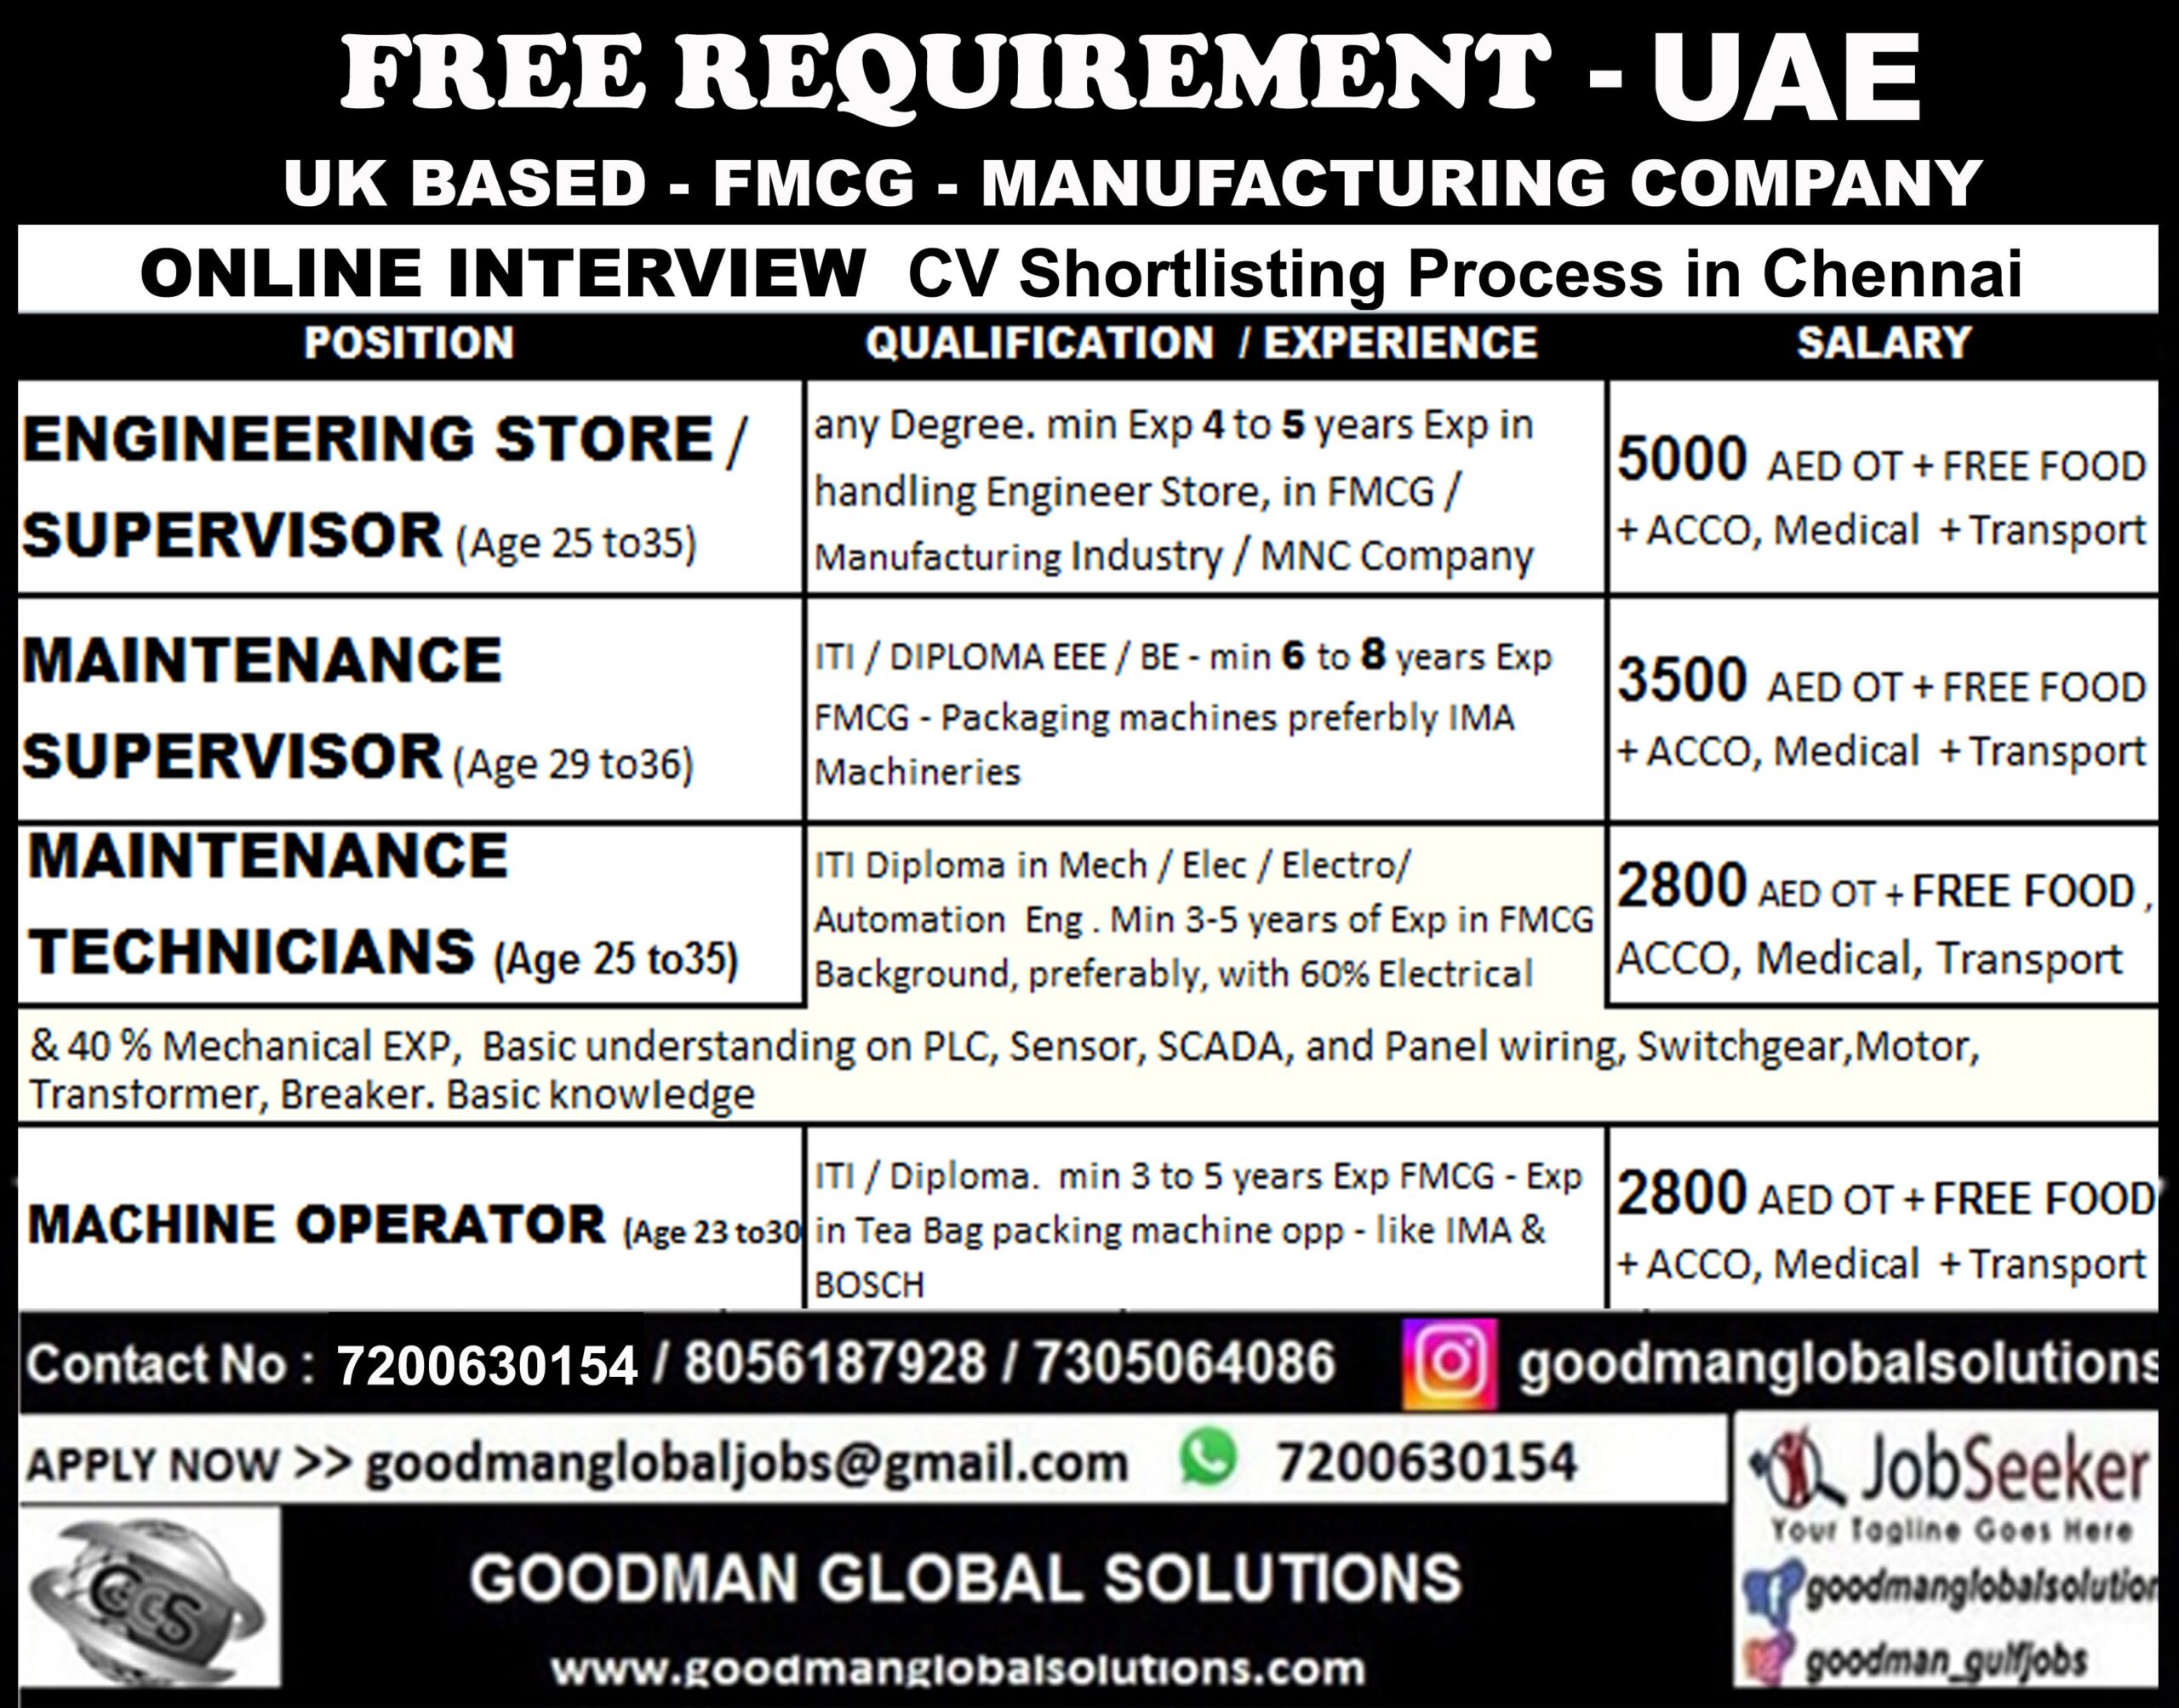 UAE FREE REQUIREMENT copy scaled